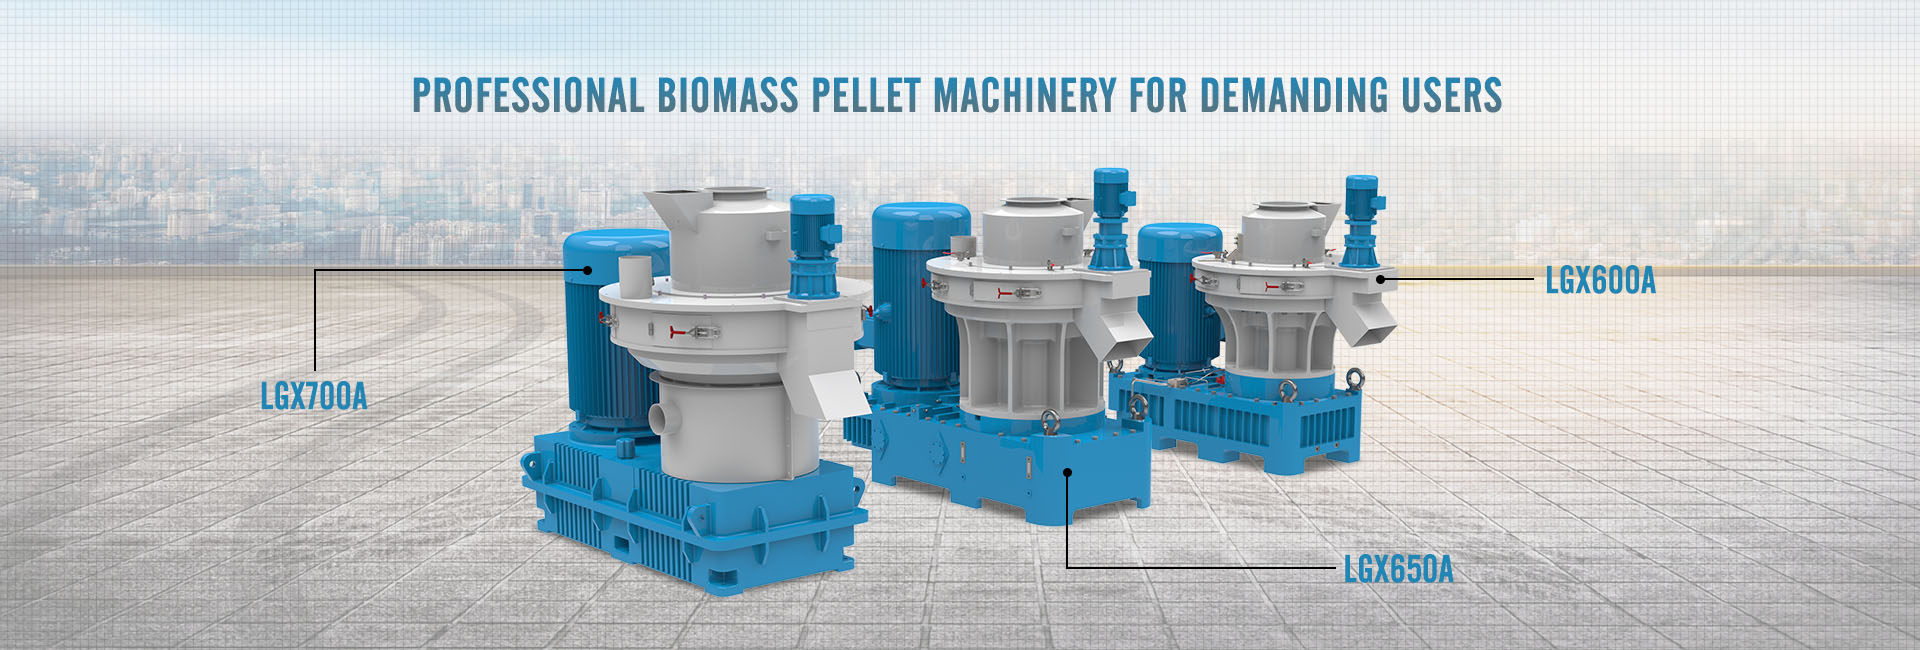 Professional biomass pellet machinery for demanding users